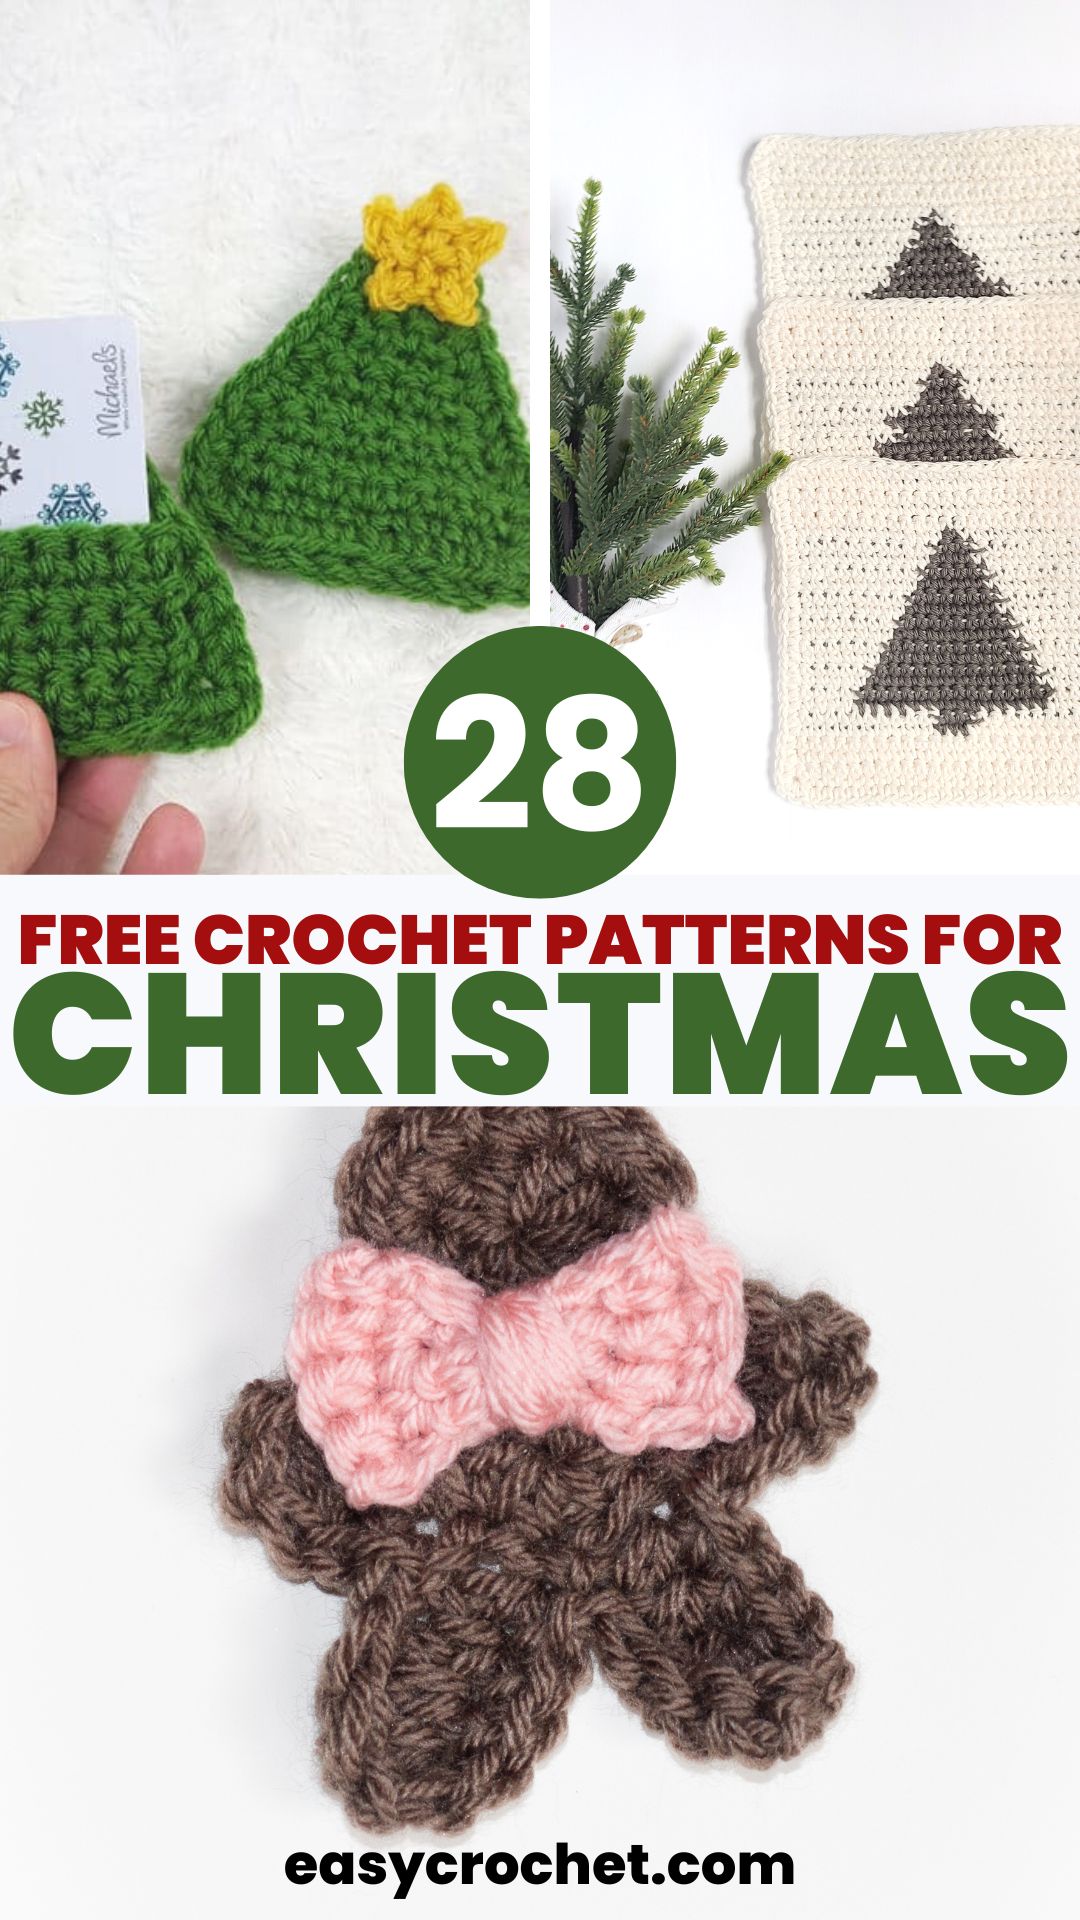 free crochet patterns for Christmas 